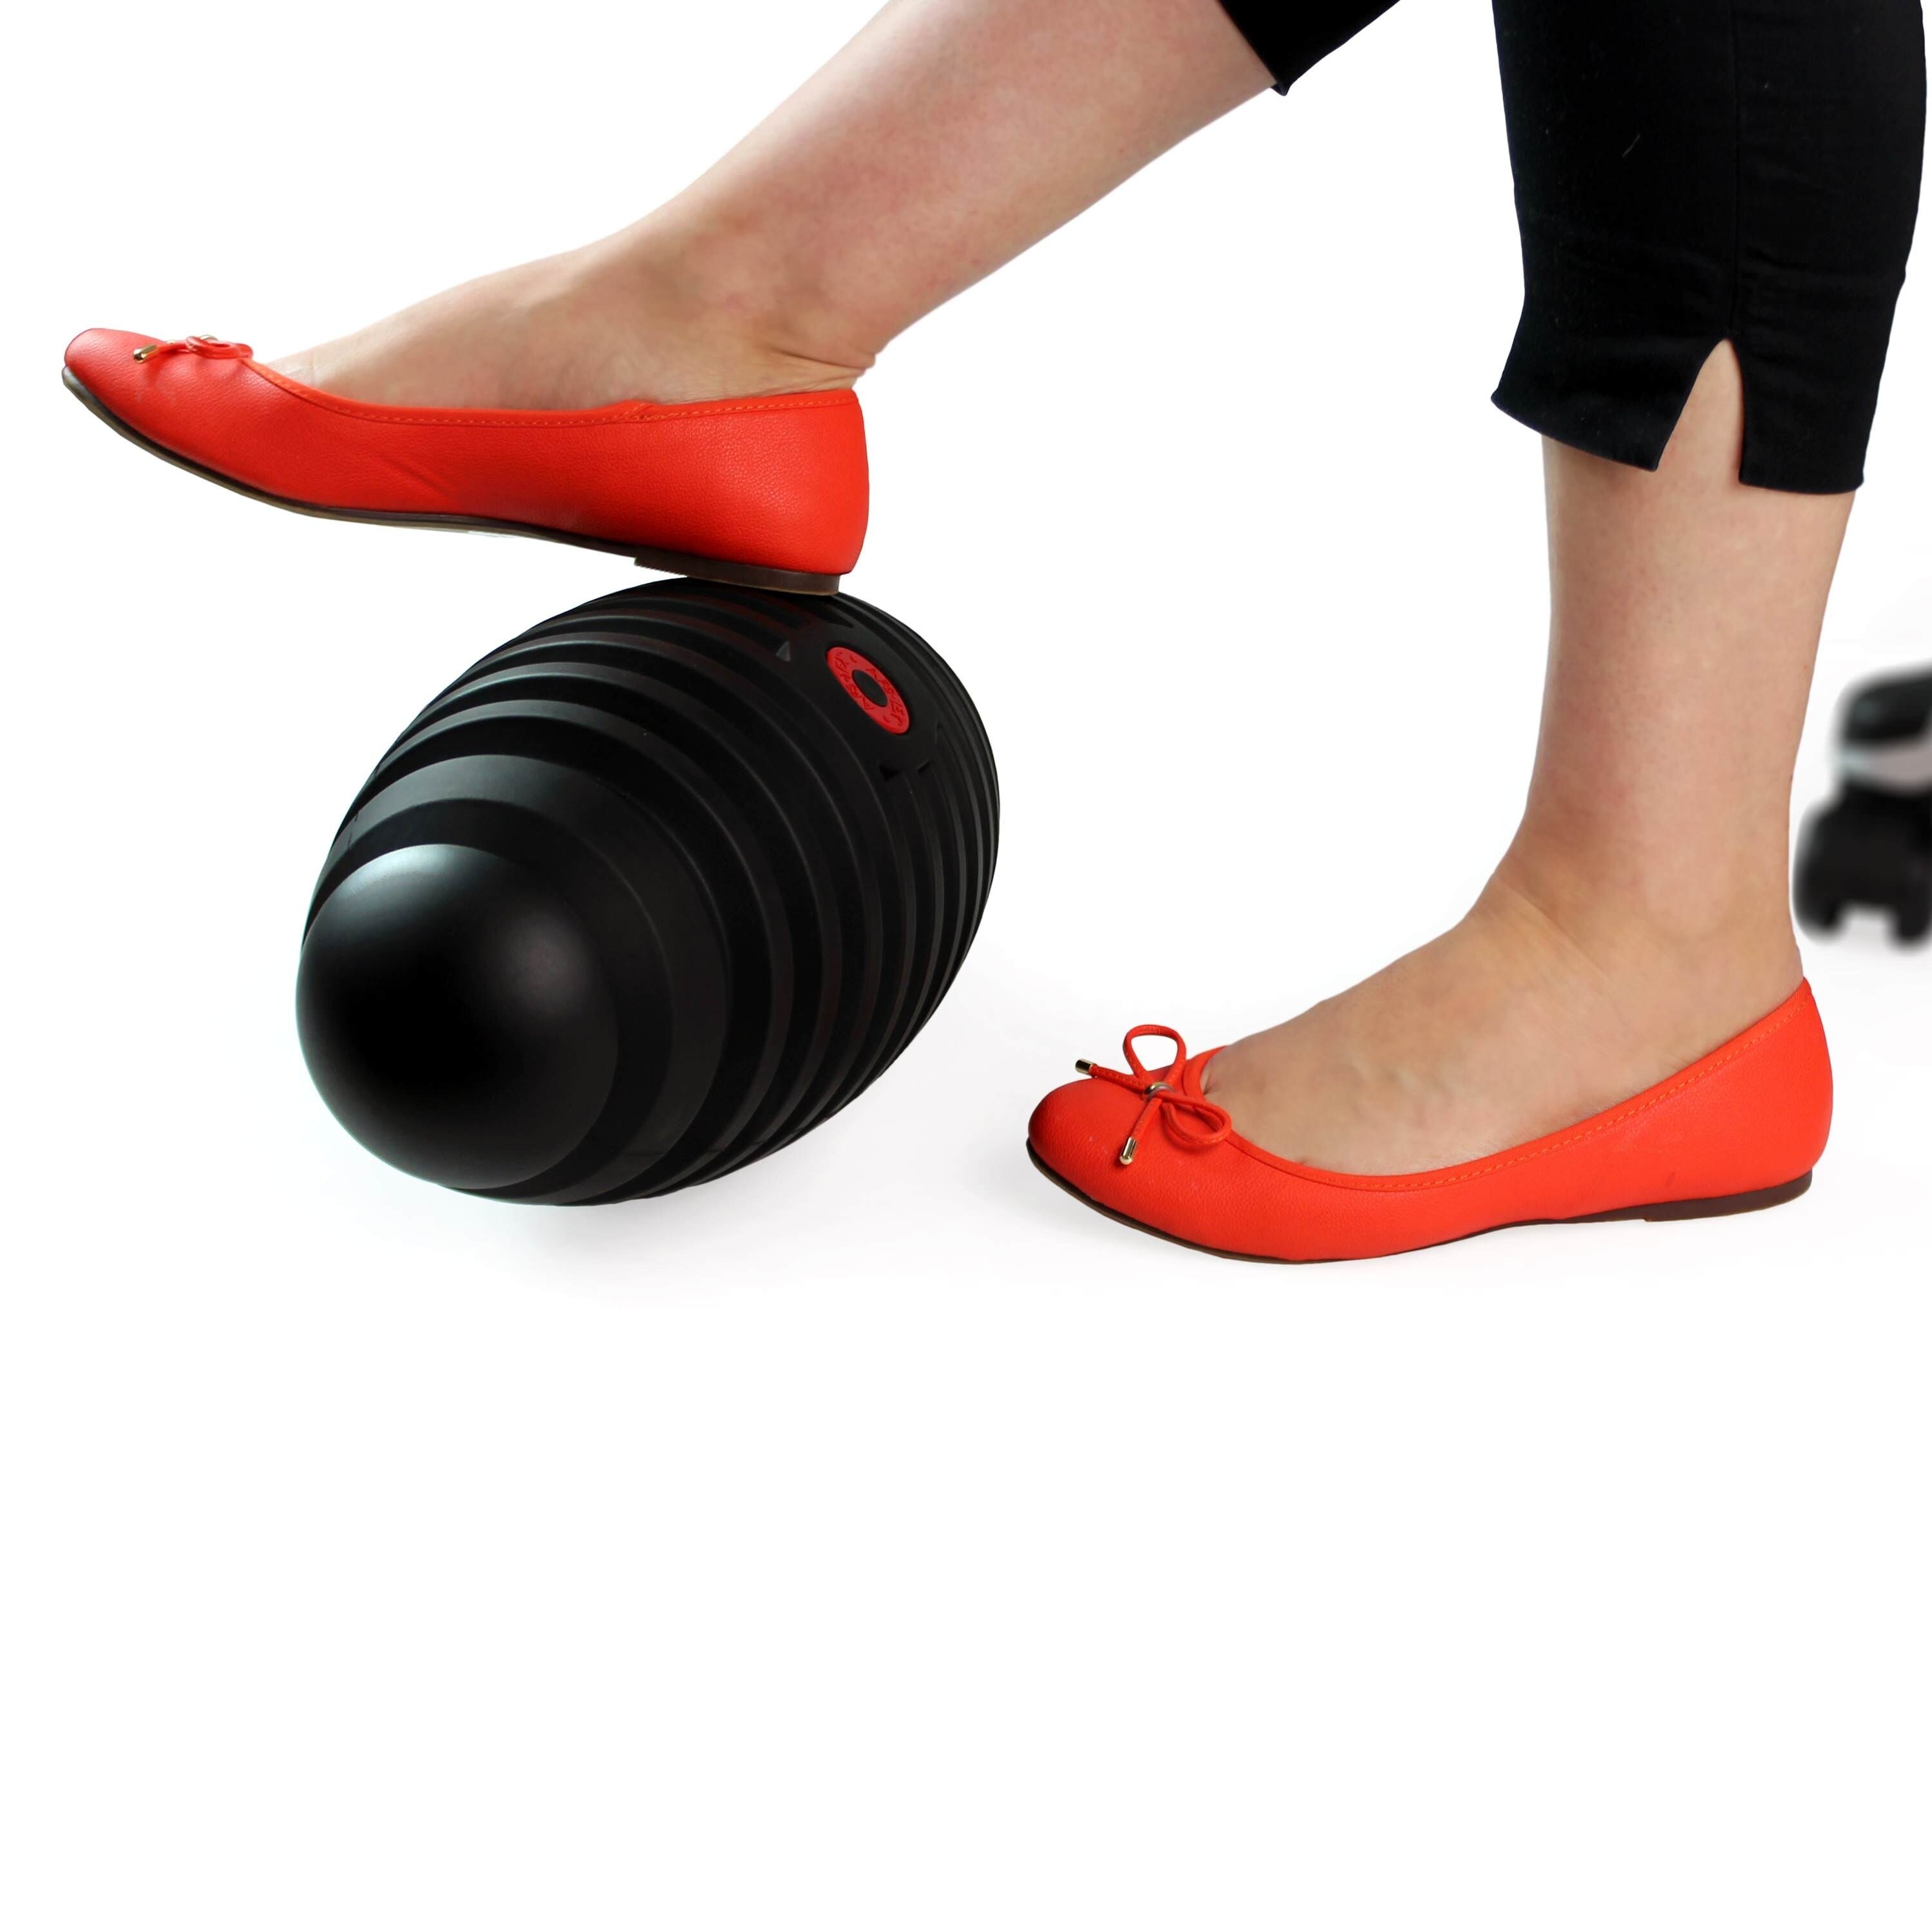 AFS-TEX Dynamic Active Foot Rest, Ergonomic Footrest For Active Offices